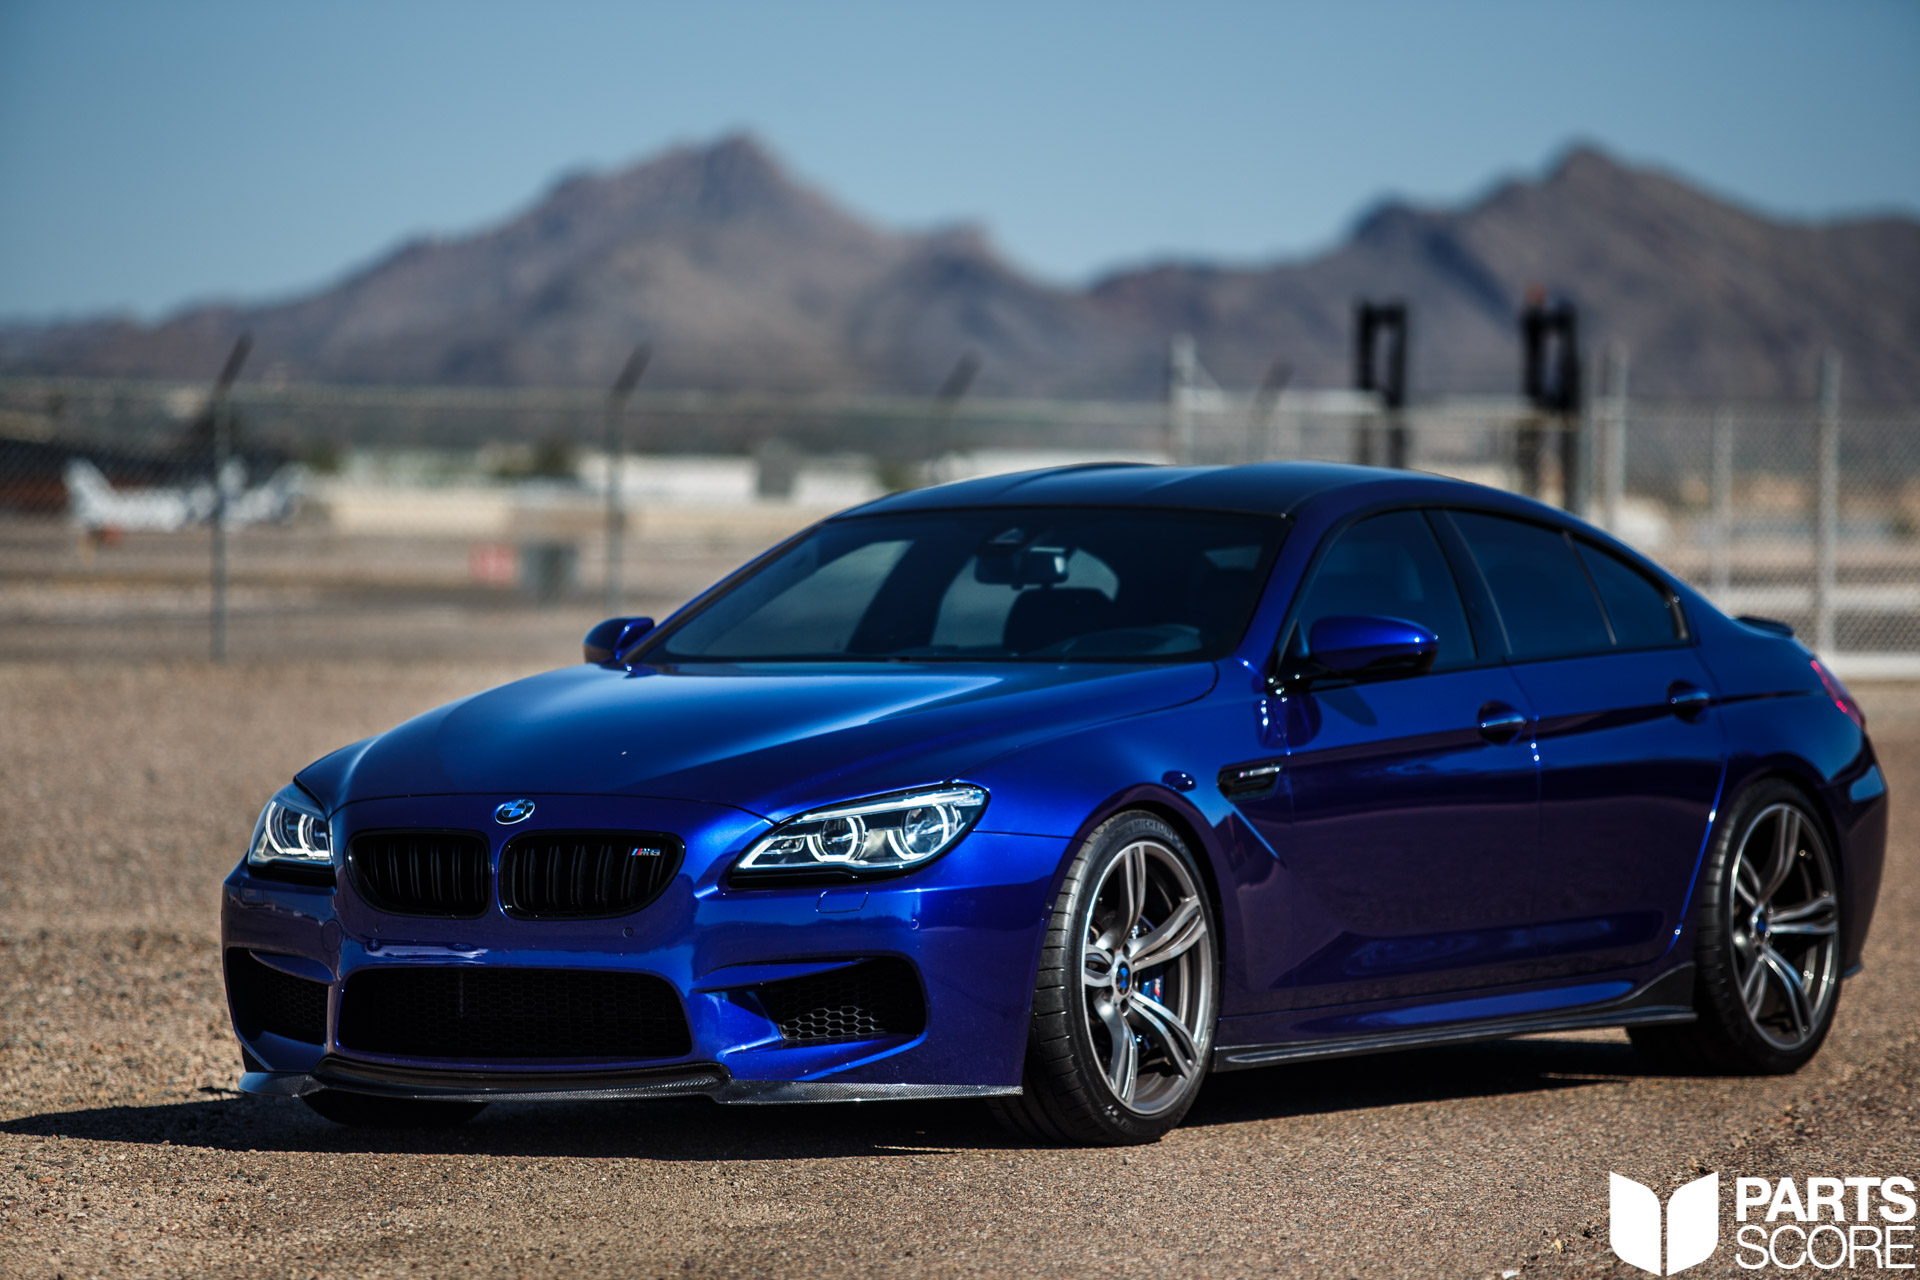 parts score, bmw, bmw m, bmw m4, bmw performance, bmw performance arizona, bmw performance scottsdale, bmw performance az, az bmw, az bmw group, carbon fiber, evolution race werks, snow performance, burger tuning, jb4, DINANTRONICS Performance Tuner Stage 2 for BMW F06 M6 Gran Coupe (S63TU), Dinan Free Flow Stainless Exhaust for BMW F06 M6 Gran Coupe, Dinan Carbon Fiber Cold Air Intake for BMW F06 M6 Gran Coupe, Dinan High Performance Adjustable Coil-Over Suspension System for BMW F06 M6 Gran Coupe, Dinan Pedal Cover Set for BMWs with DCT Transmissions, Dinan S-1 Under-hood Plaque and Dinan Deck Lid Badge, DTM Carbon Fiber Front Lip, DTM Carbon Fiber Trunk Spoiler, DTM Carbon Fiber Rear Diffuser, DTM Carbon Fiber Side Skirt Extensions, IND Distribution Cosmetic Package, San Marino Blue Metallic Painted Rear Reflectors, San Marino Blue Metallic Painted Front Reflectors, Gloss Black Painted Front Grille Set, Gloss Black Side Marker Set, AFE Power: Carbon Fiber S63TU Engine Cover, clear coated to match the Dinan Cold Air Intake, Burger Tuning 10mm Spacers, Burger Tuning 12mm Spacers